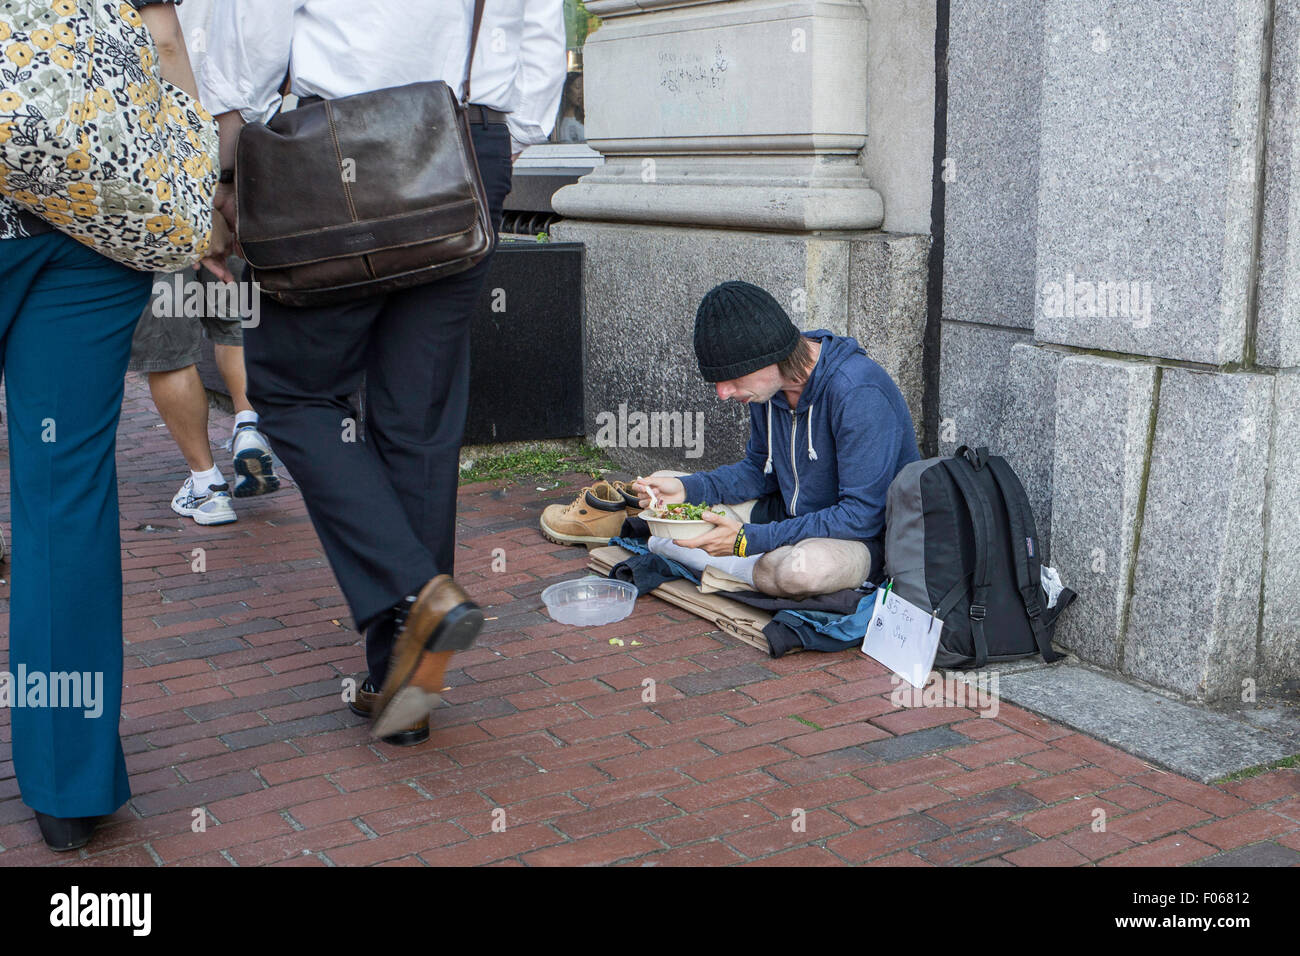 Homeless person eating on the sidewalk in Cambridge, MA Stock Photo